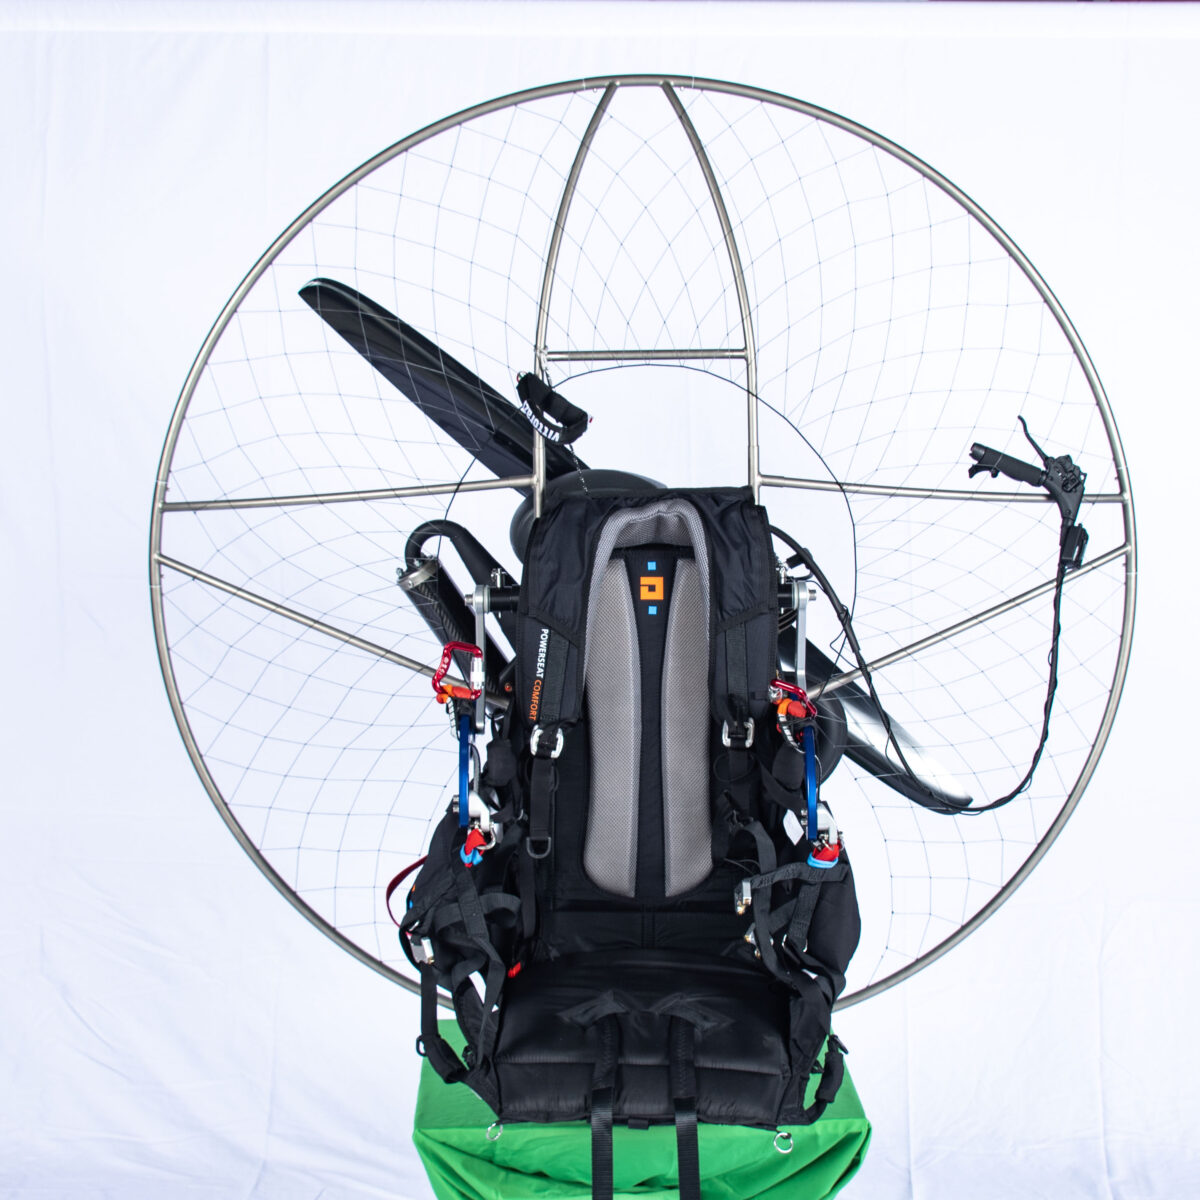 Limitless paramotor frame with harness